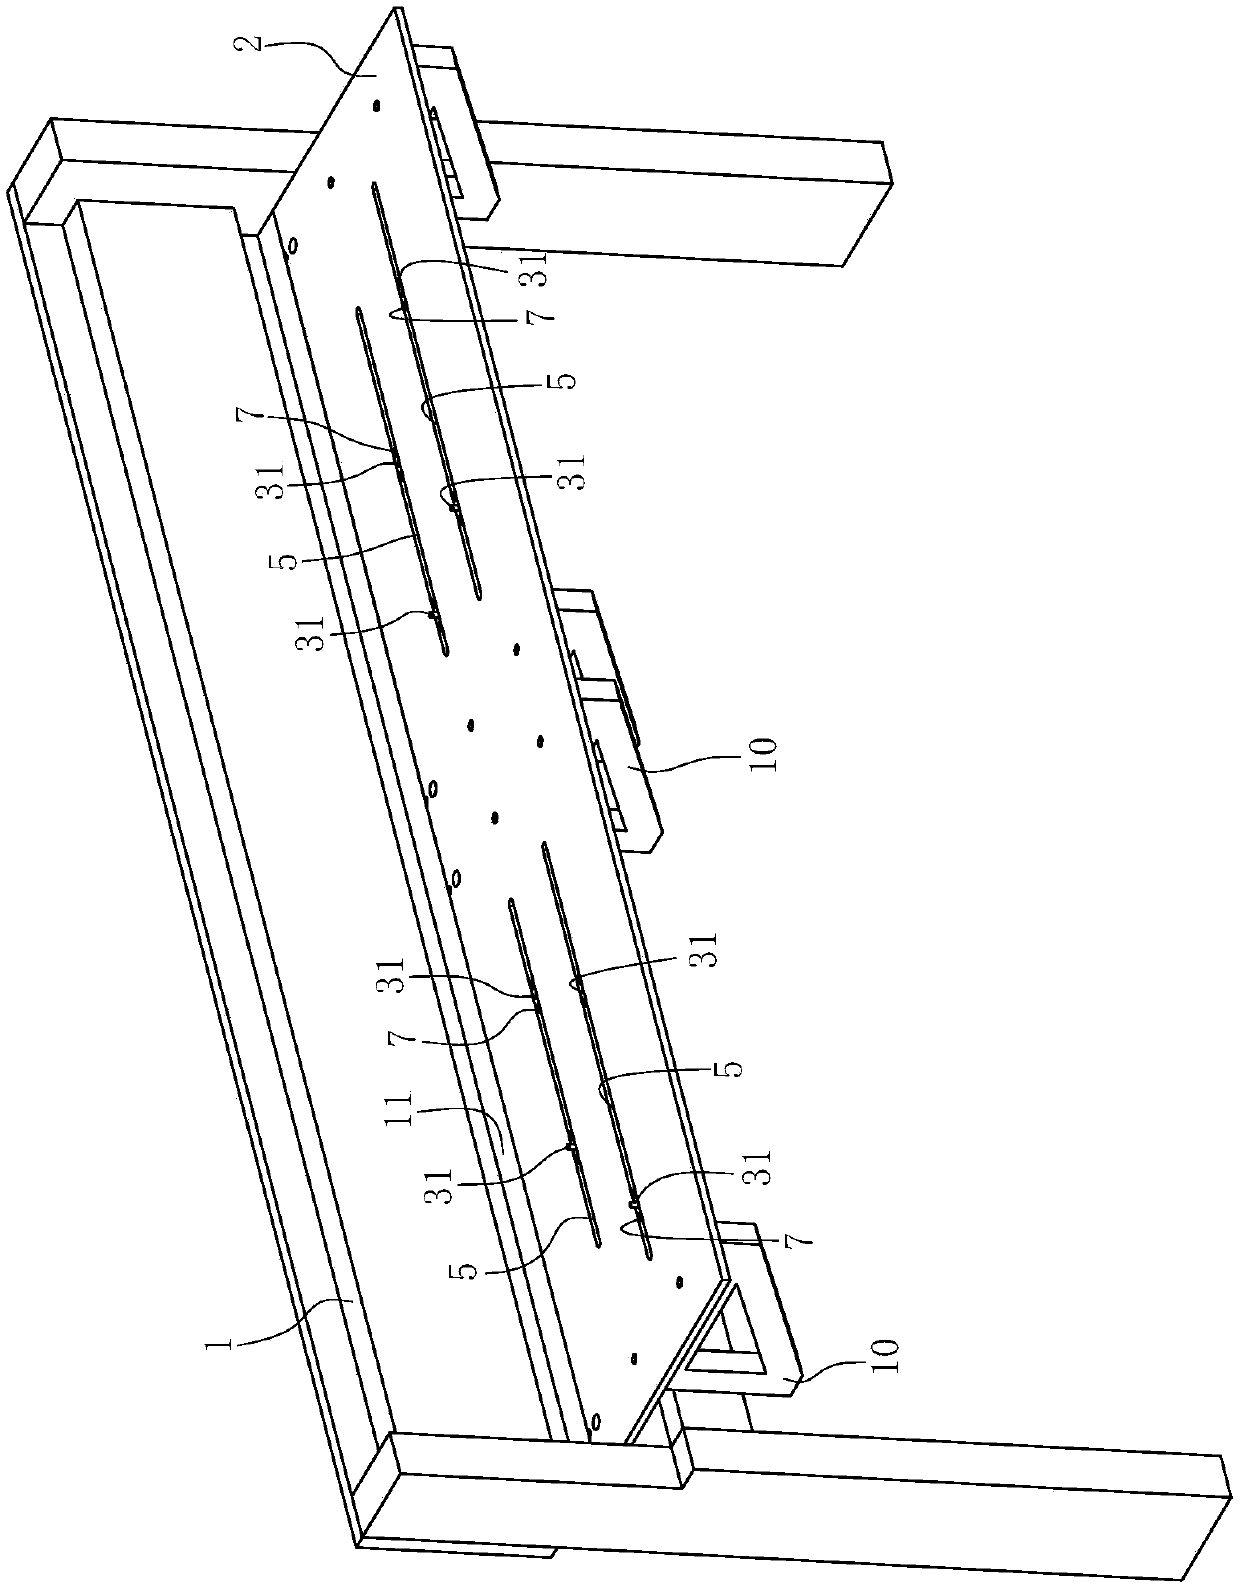 Supporting plate mechanism capable of being additionally installed on general plate shearing machine and used for positioning corner shearing of rectangular plate